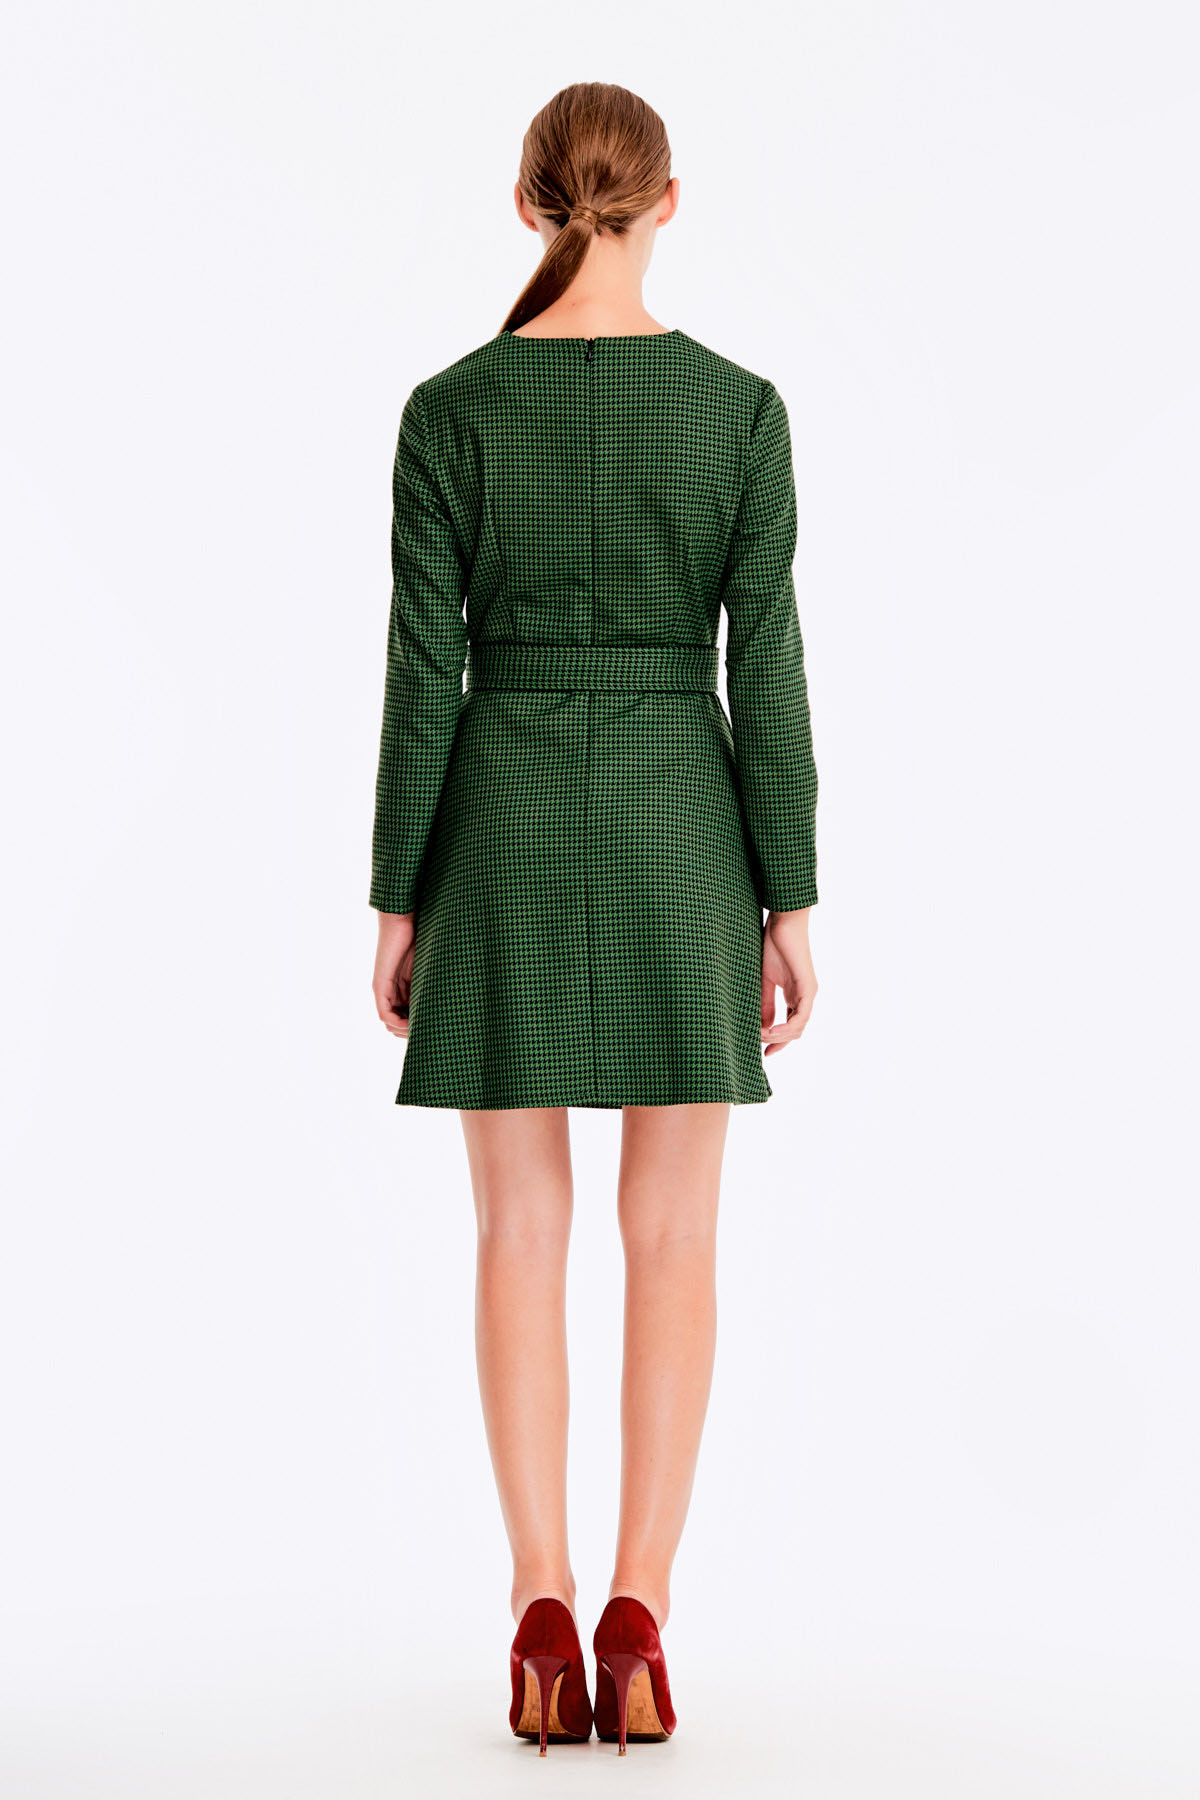 Green dress with a houndstooth print, photo 7